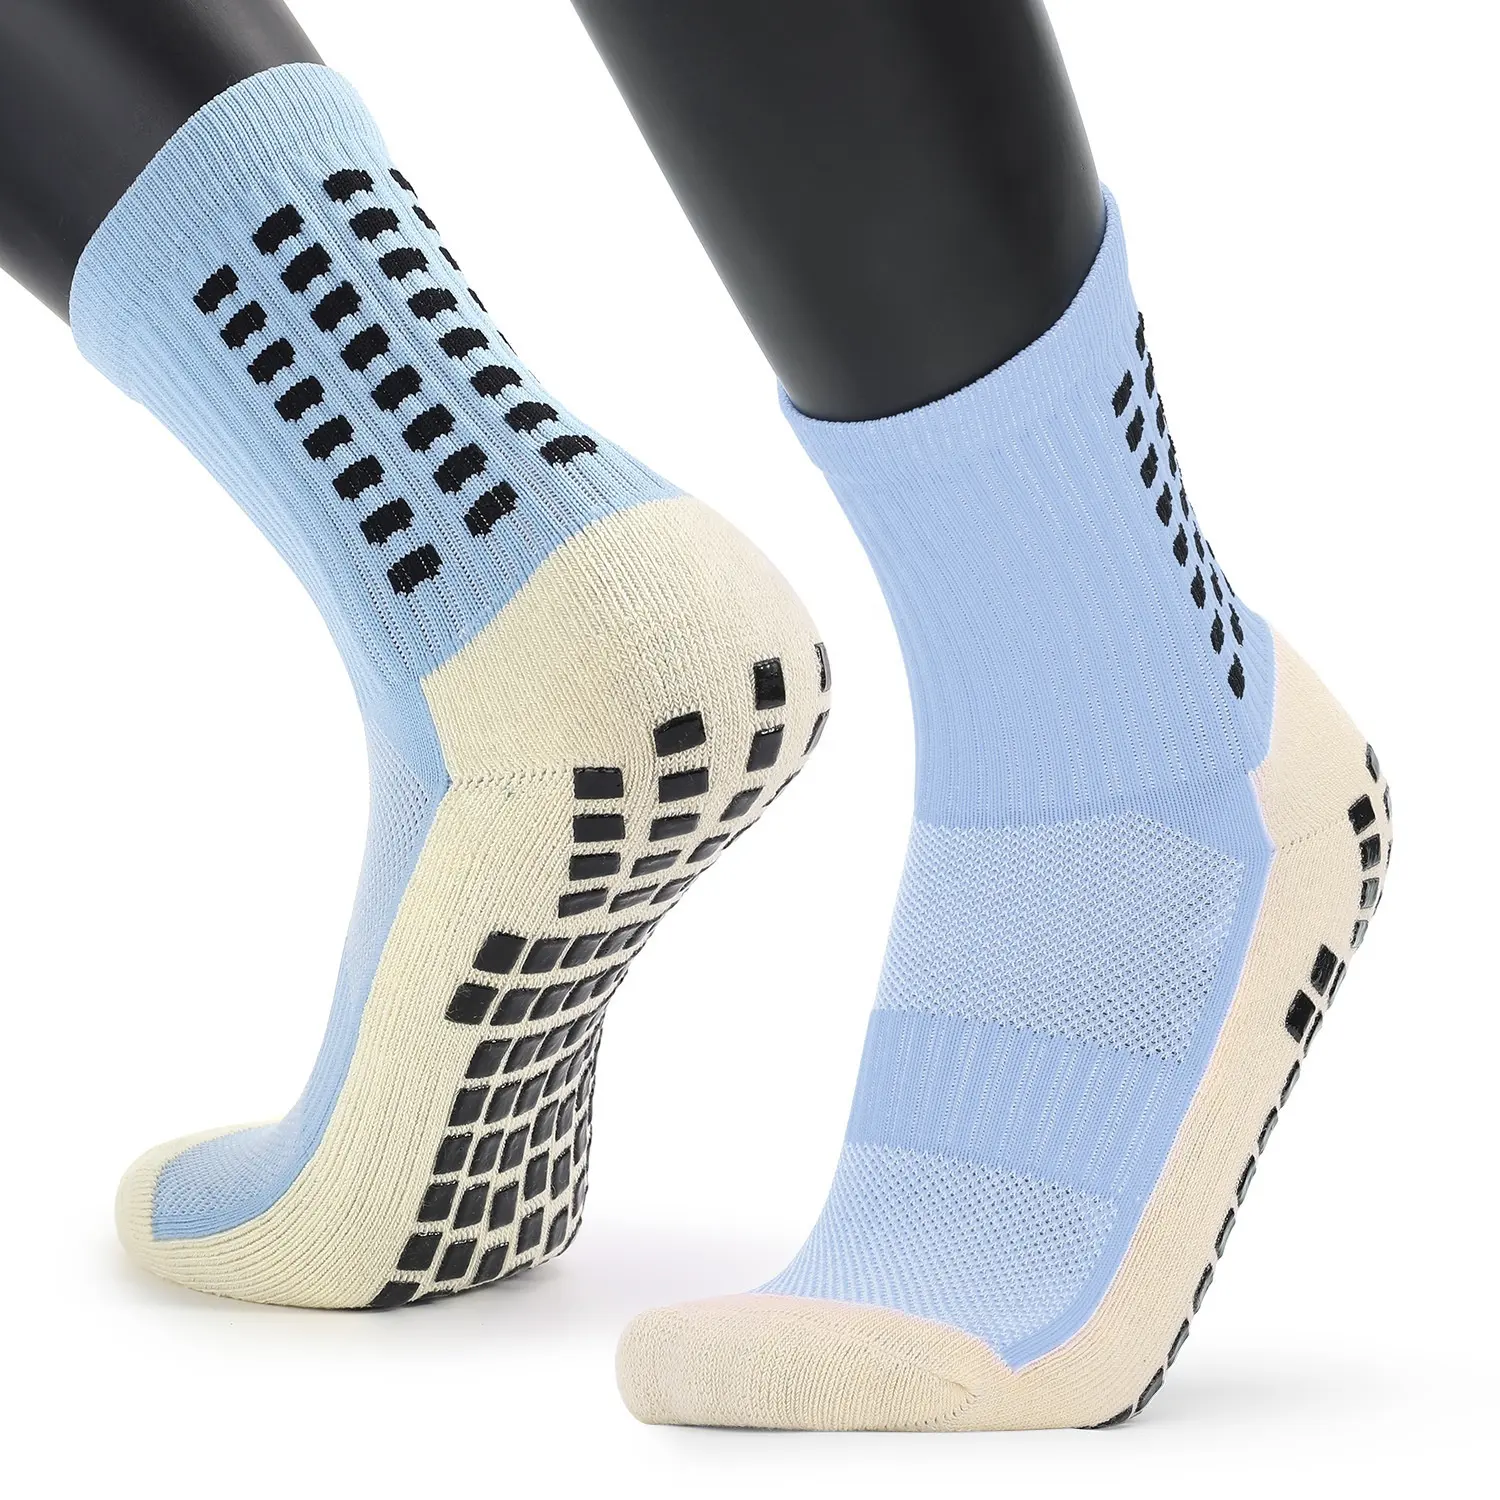 High demand products Sports fashion socks men's mid-tube with rubber non-slip football socks